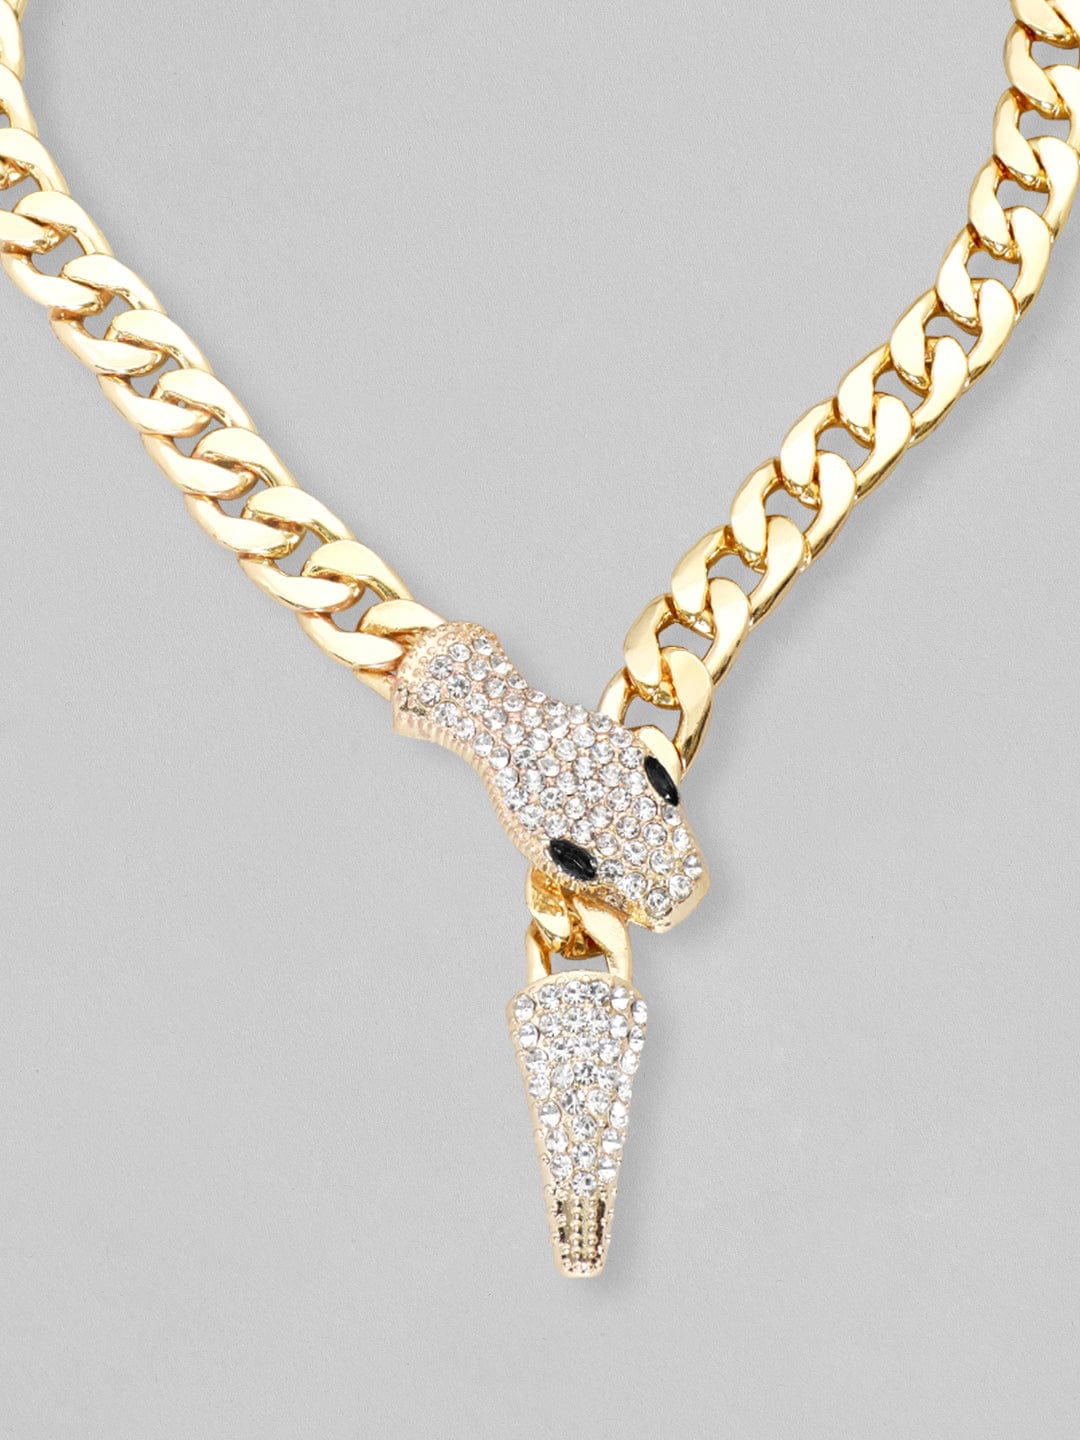 Rubans Voguish Gold Toned Link Style Serpent Chain With Zircon Stones Studded. Chain &amp; Necklaces